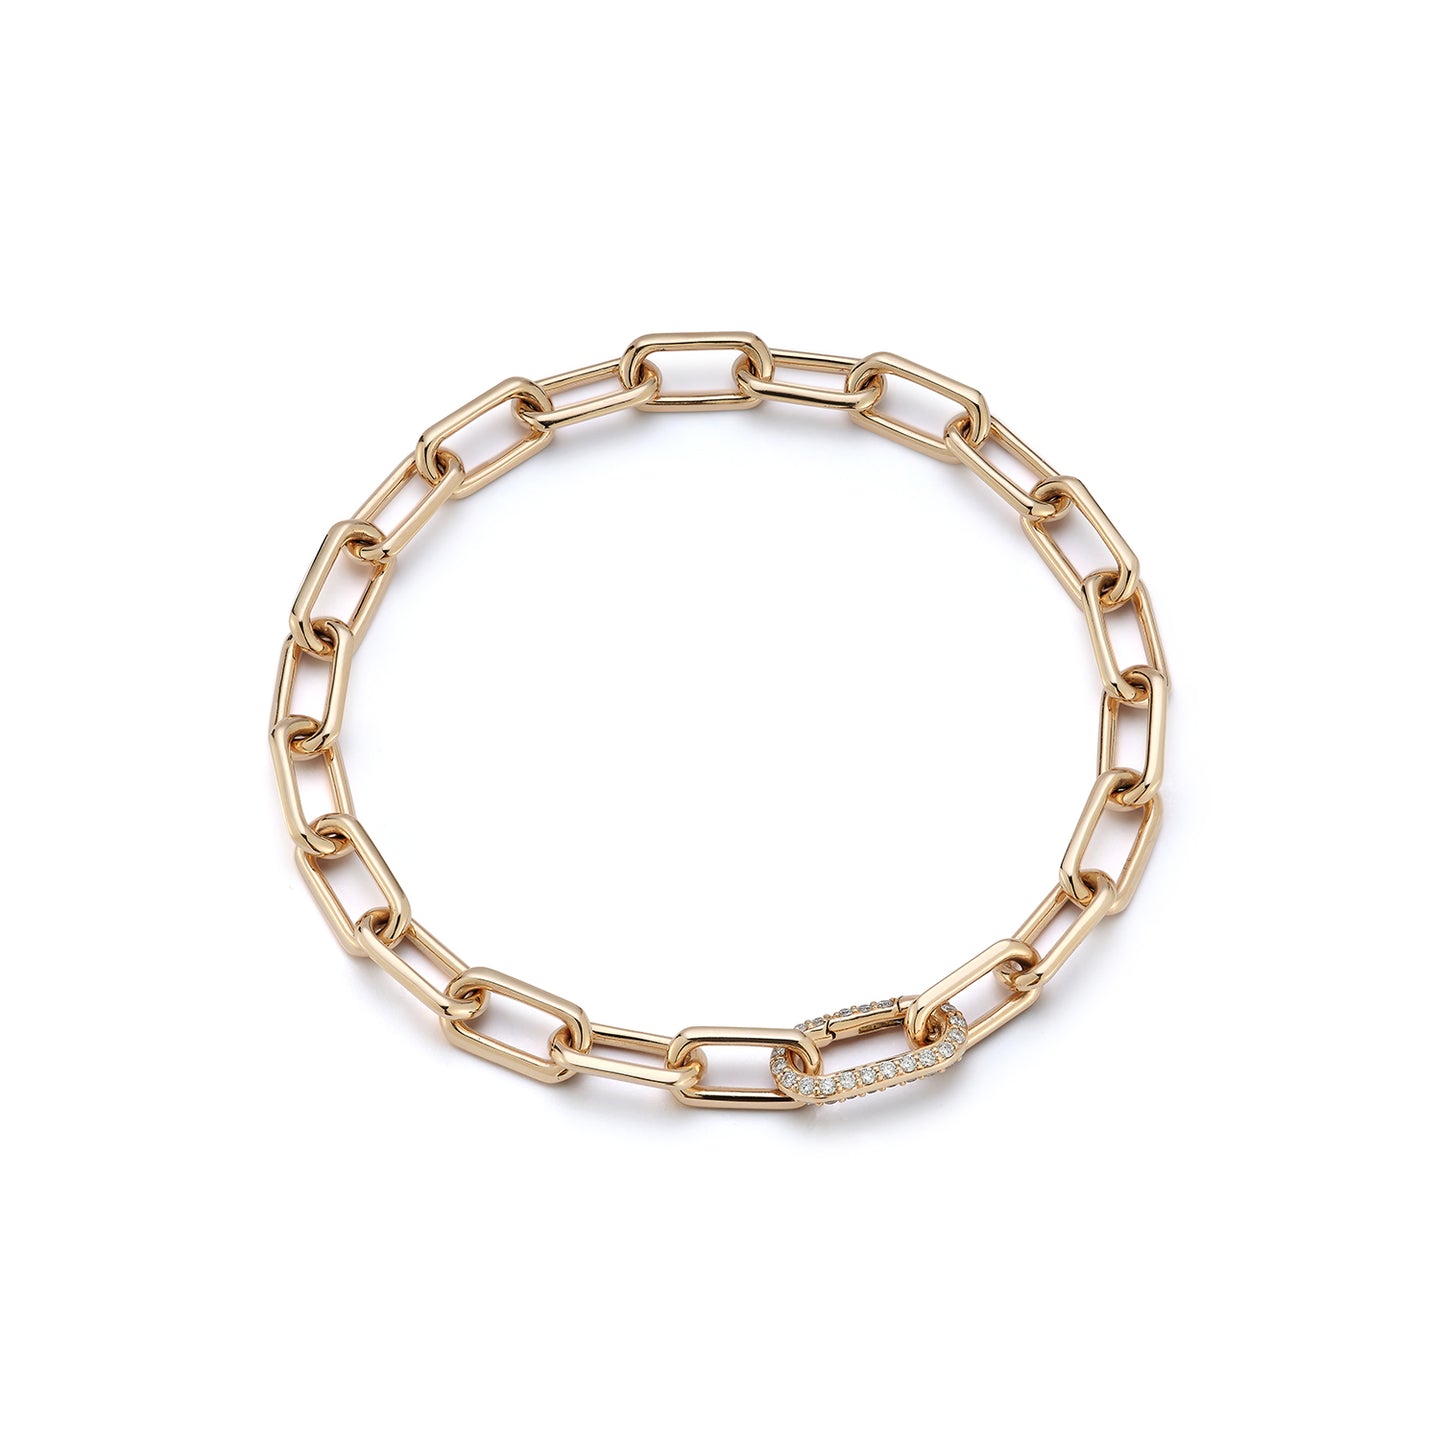 SAXON 18K GOLD CHAIN LINK BRACELET WITH ELONGATED ALL DIAMOND CLASP